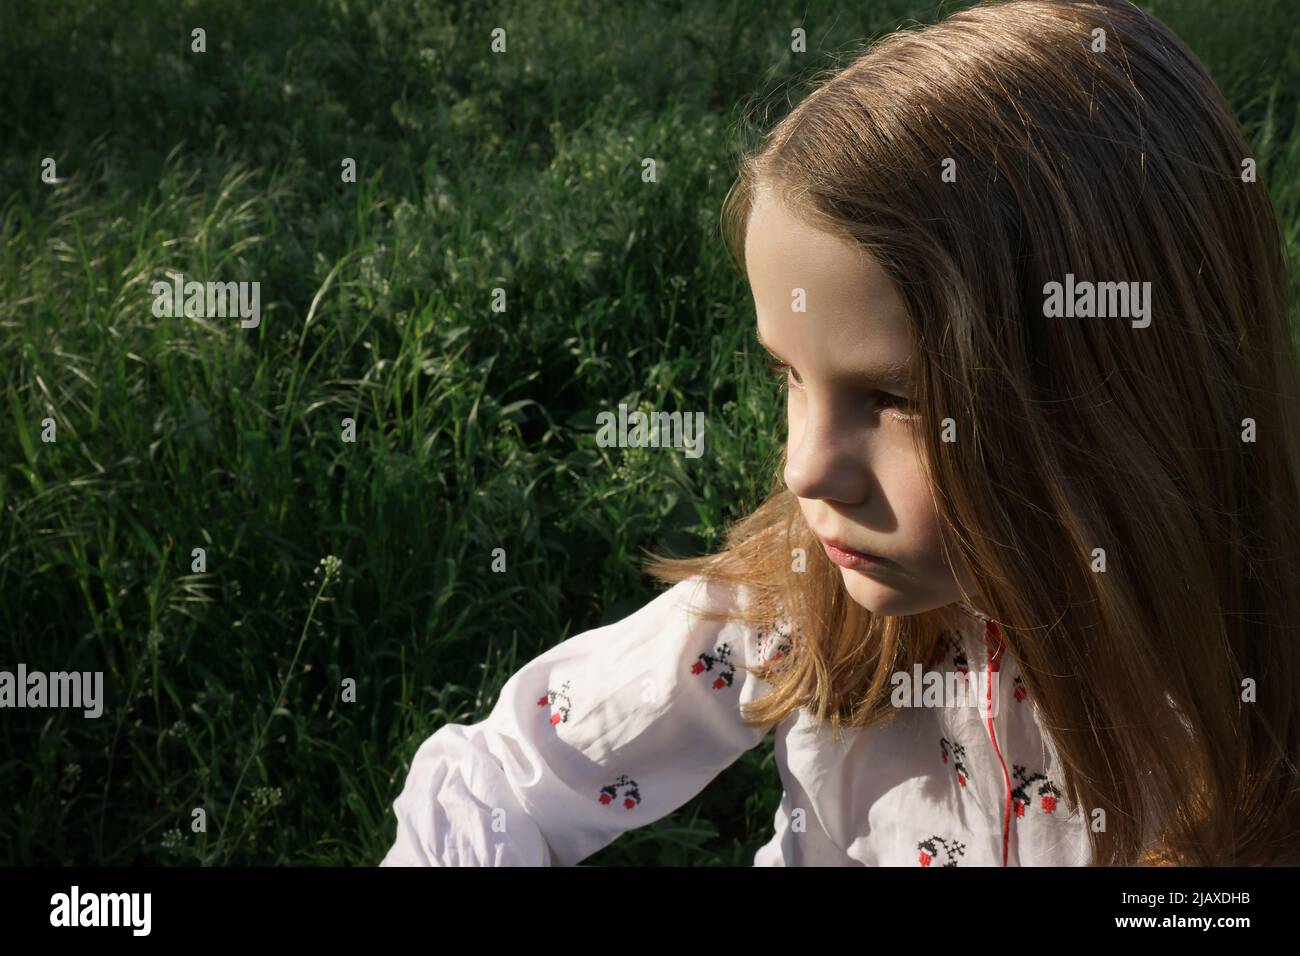 Sad girl in an embroidered shirt on a background of green grass Stock Photo